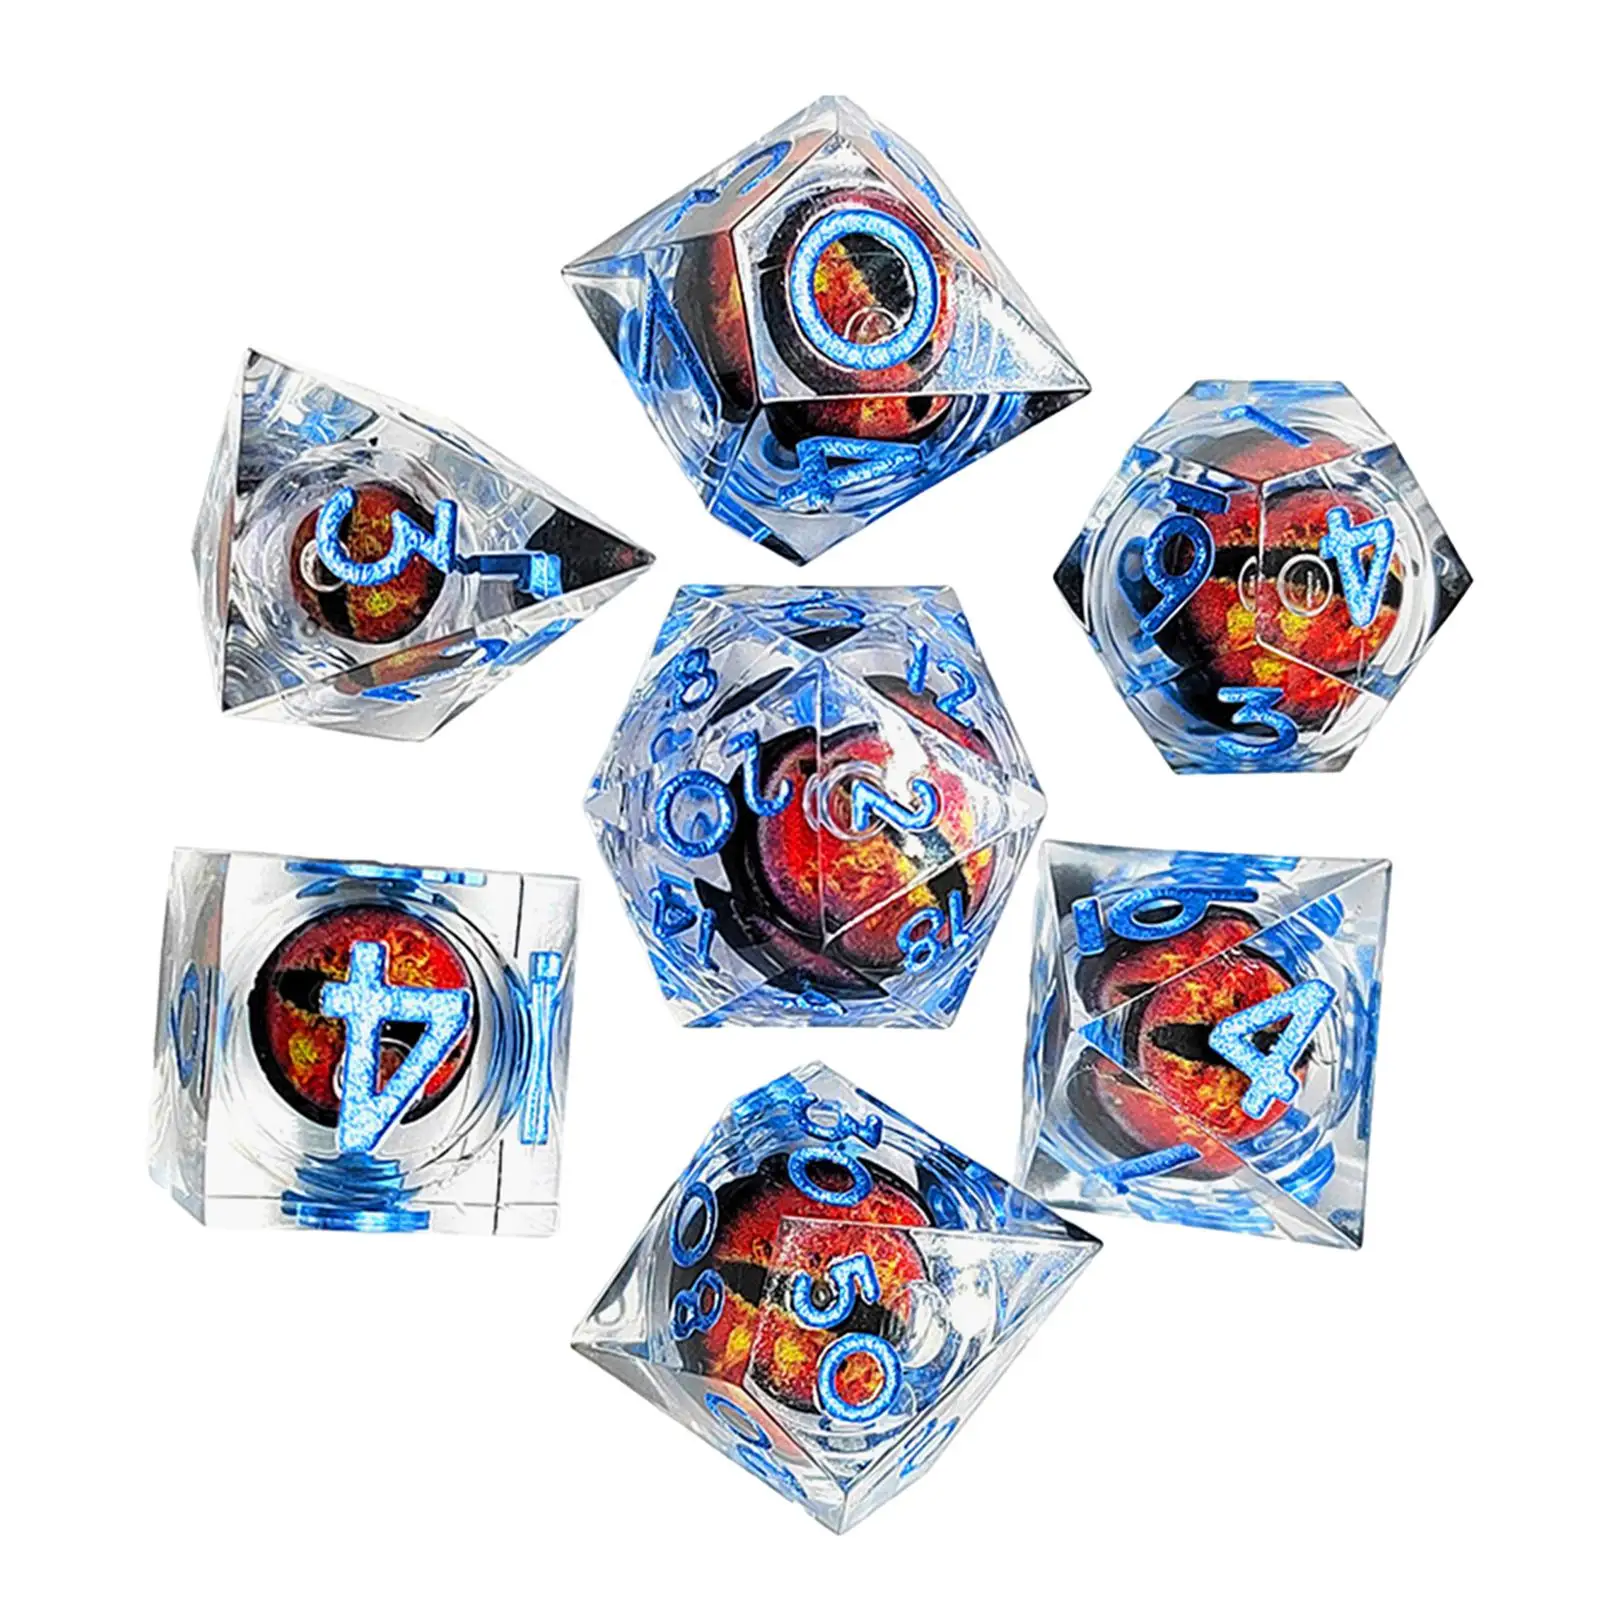 Resin Polyhedral Eye Dice 7Pcs Set Accessories for Dice Collecting